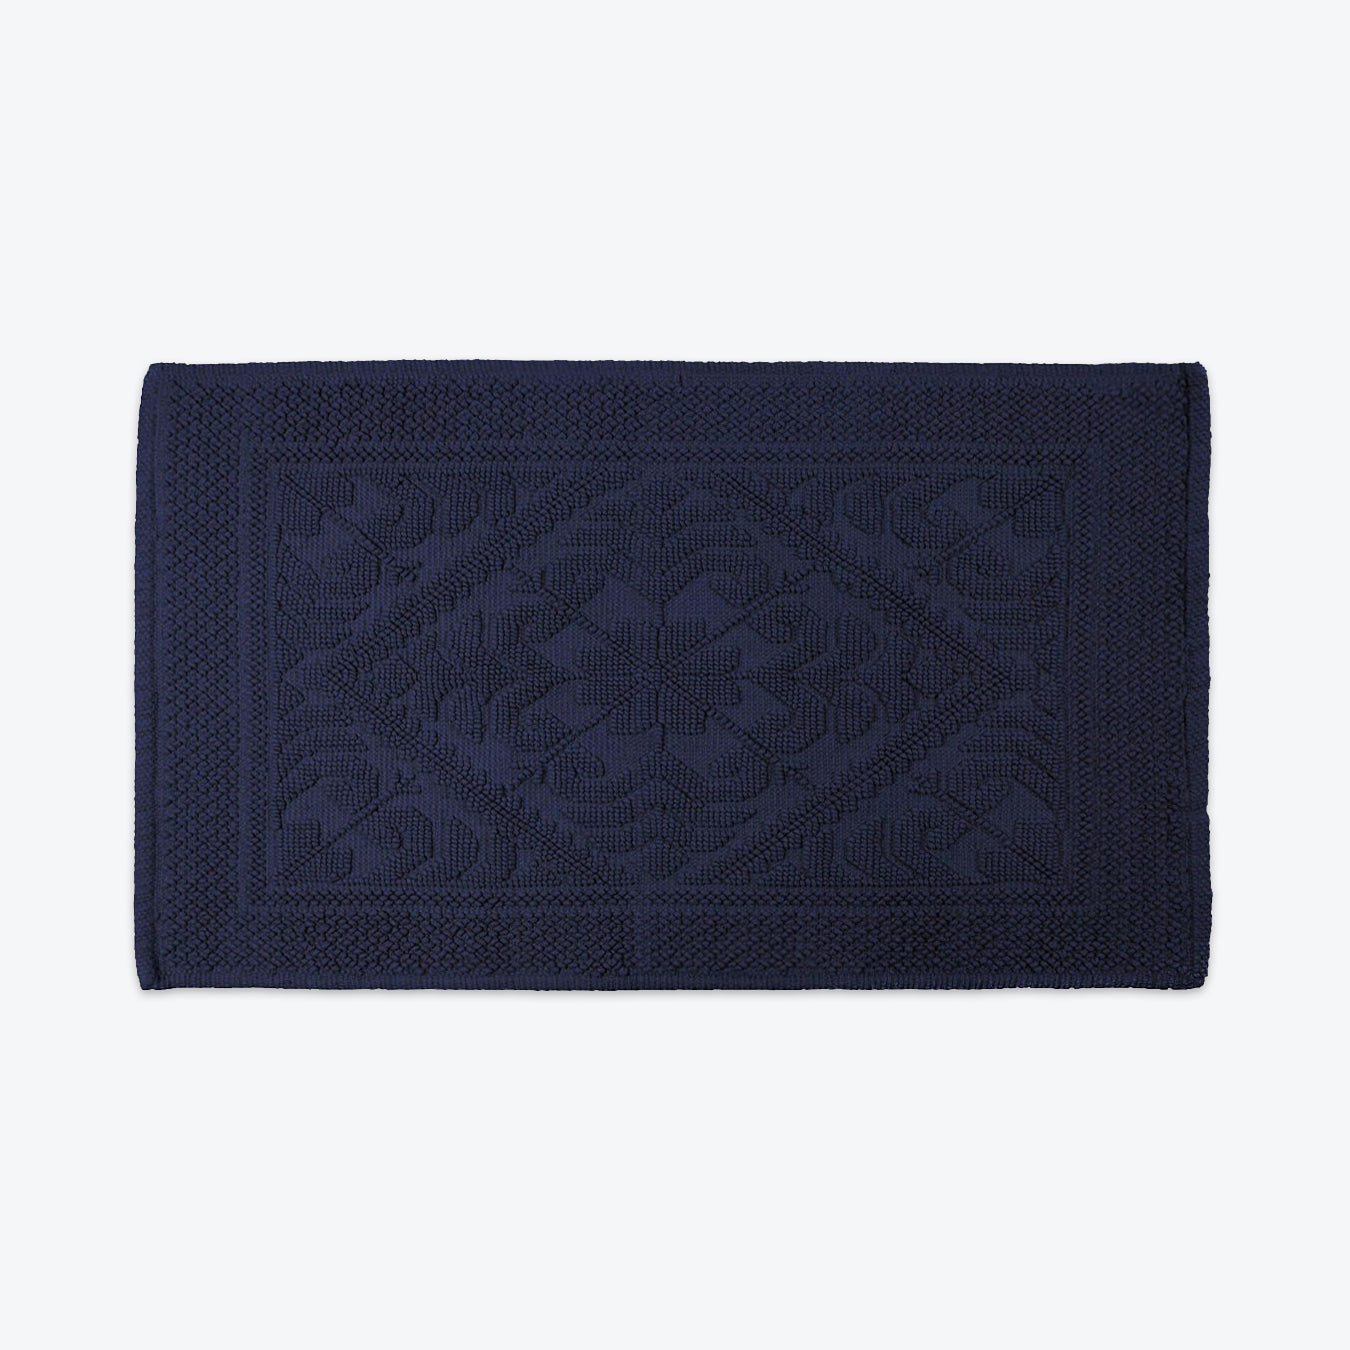 Navy Blue Country House Bath Mat - Textured Cotton Rug